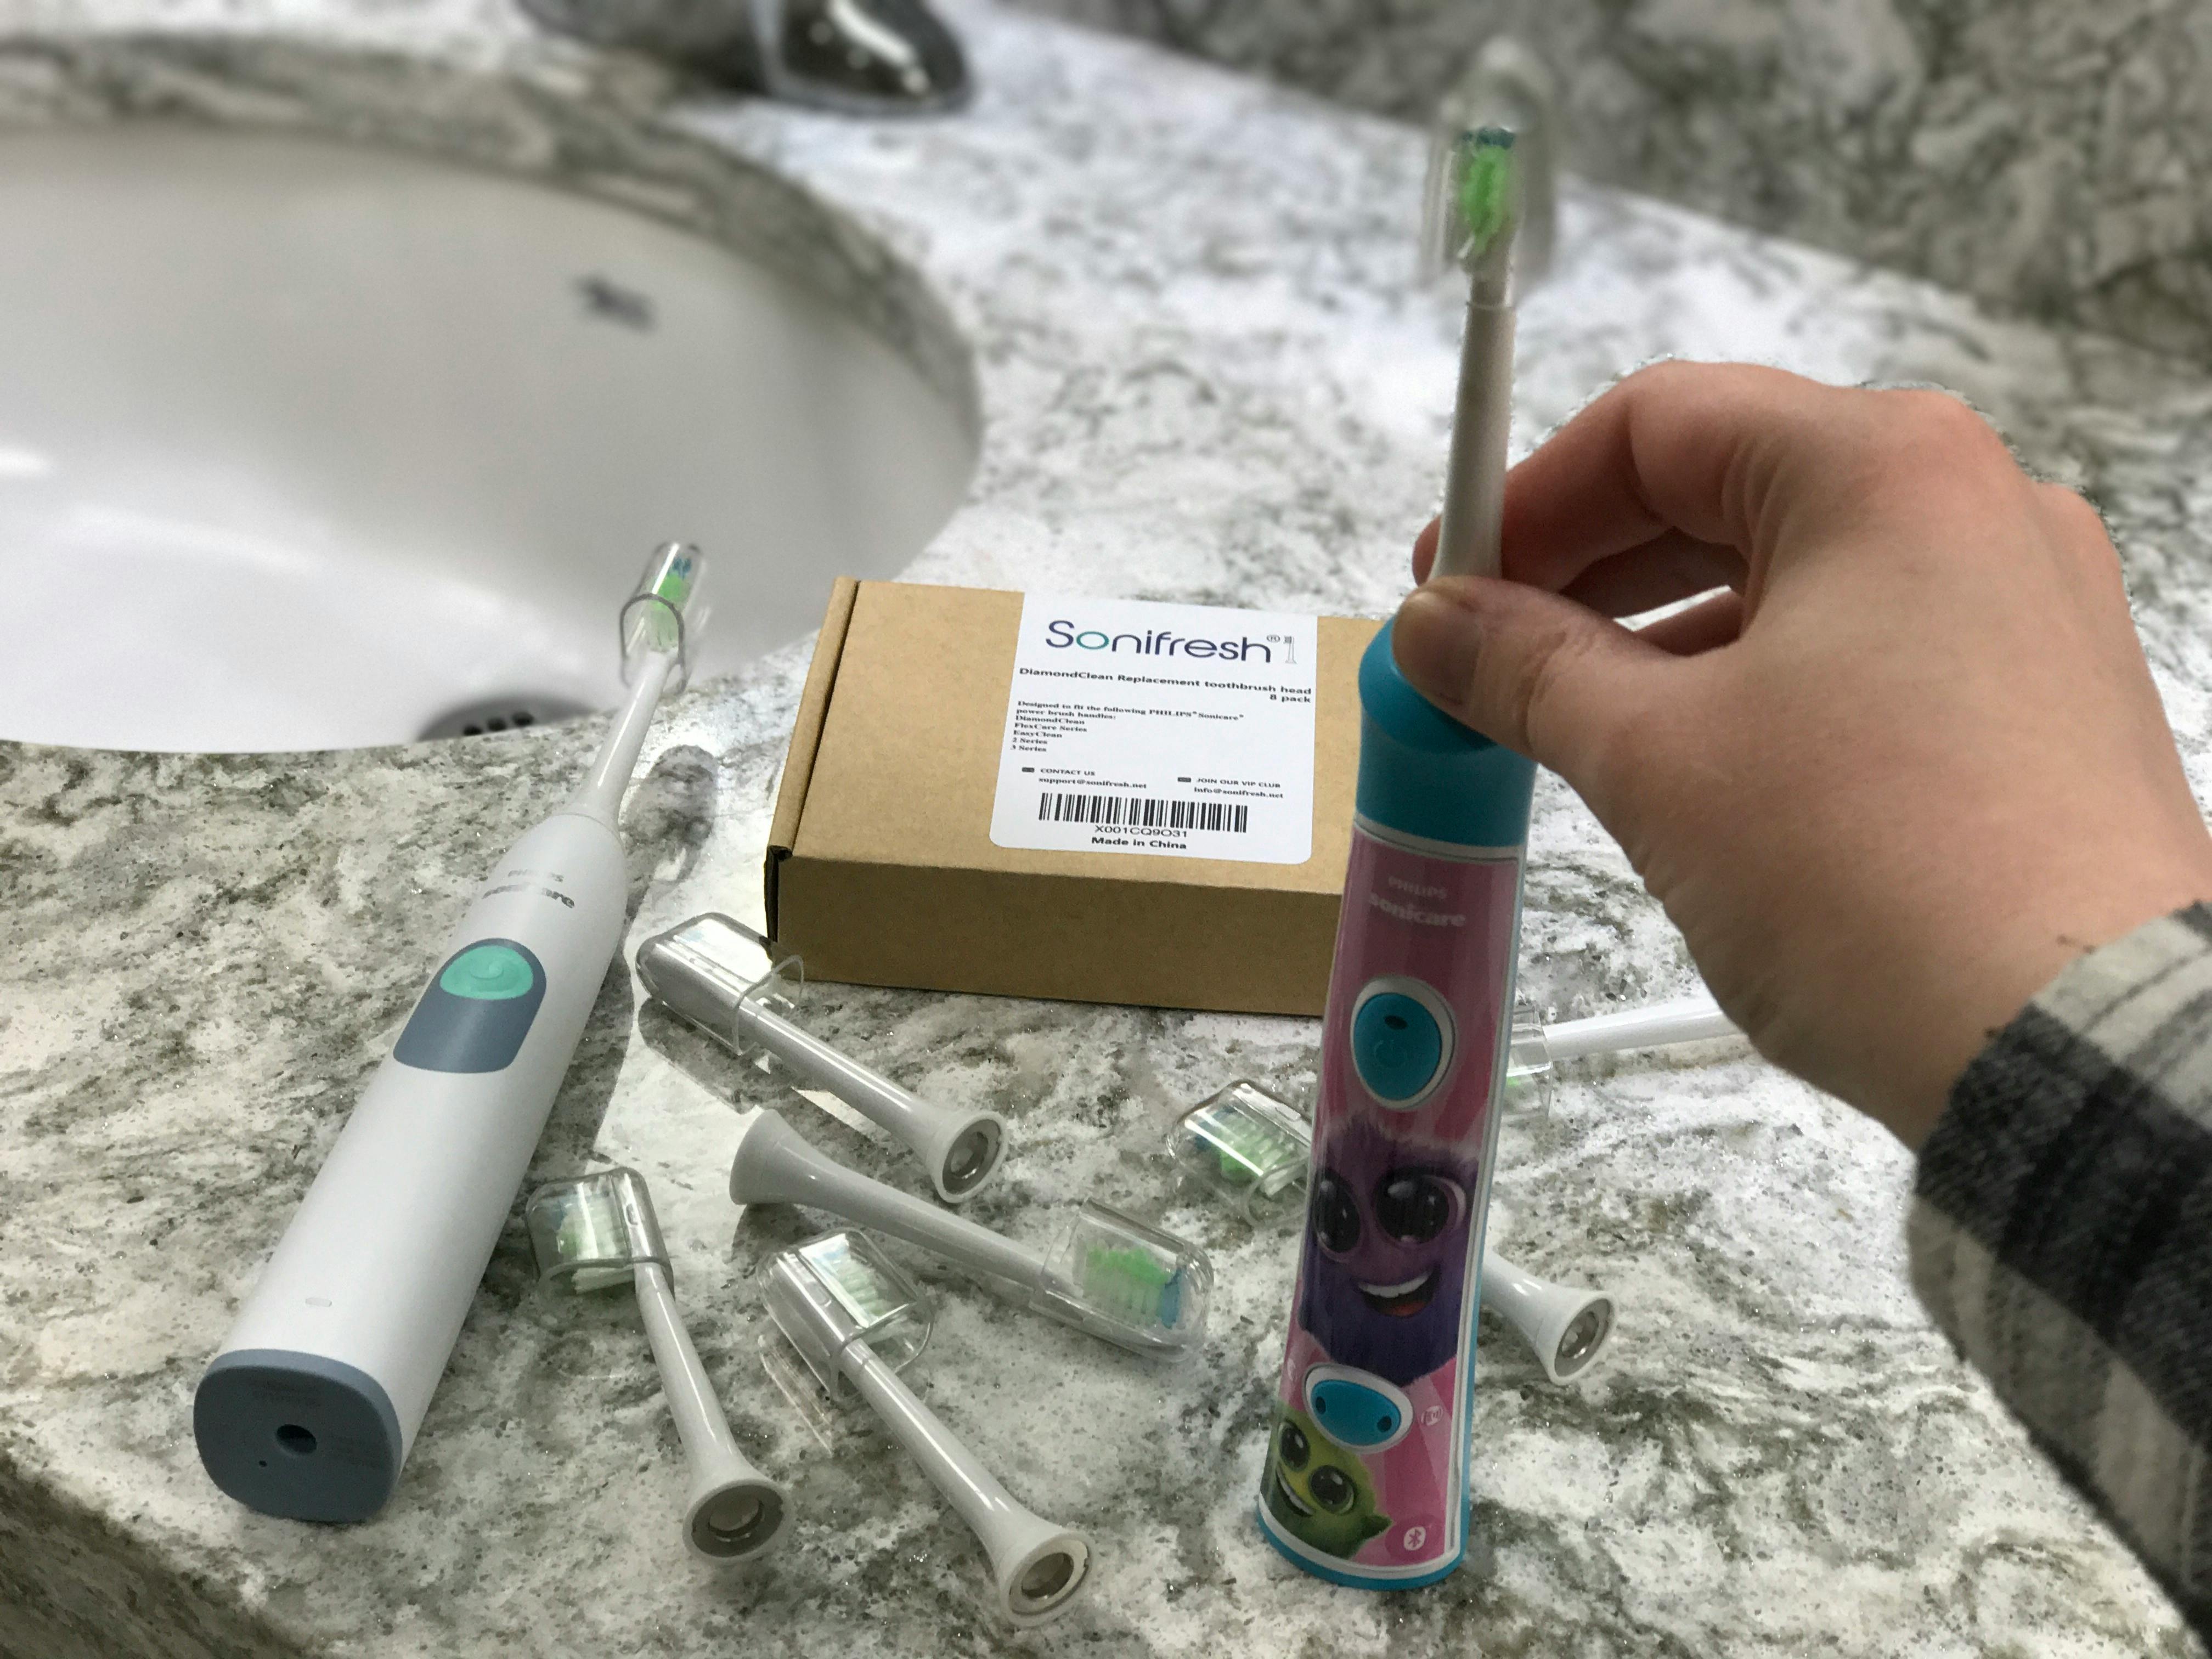 A person holding a Sonicare toothbrush at a sink.